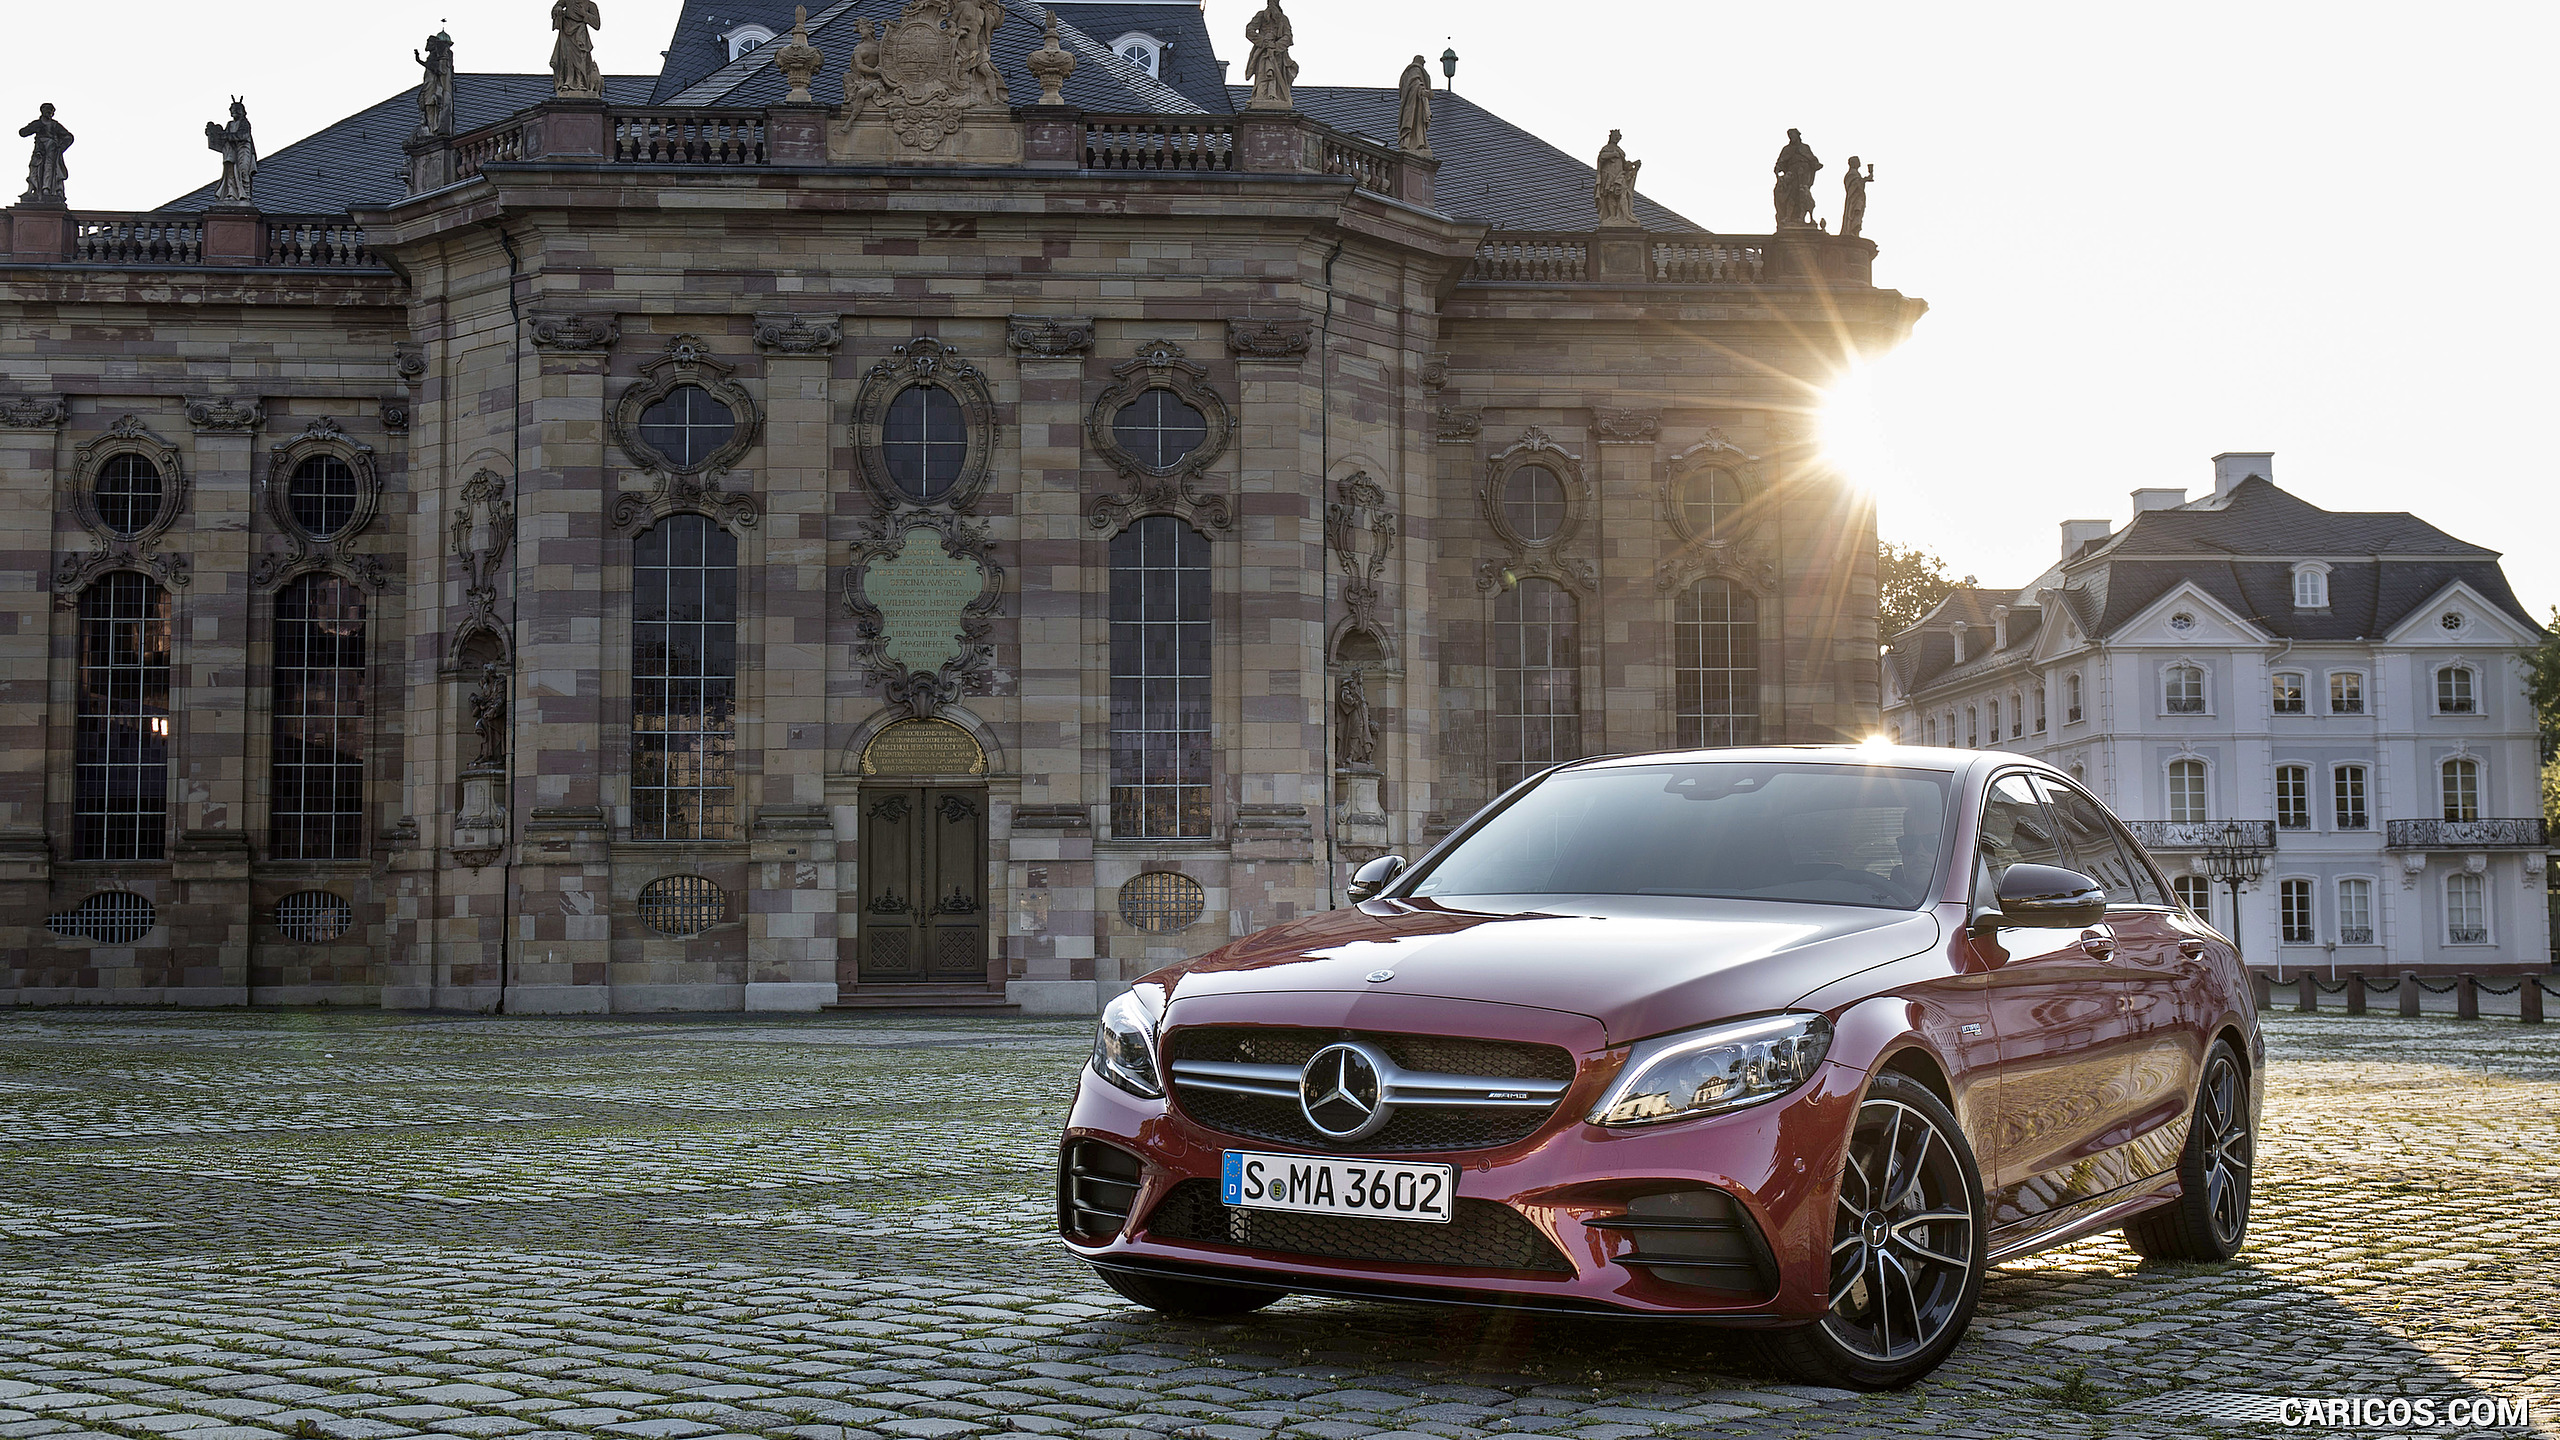 2019 Mercedes-AMG C43 4MATIC Sedan (Color: Hyacinth Red) - Front Three-Quarter, #54 of 192